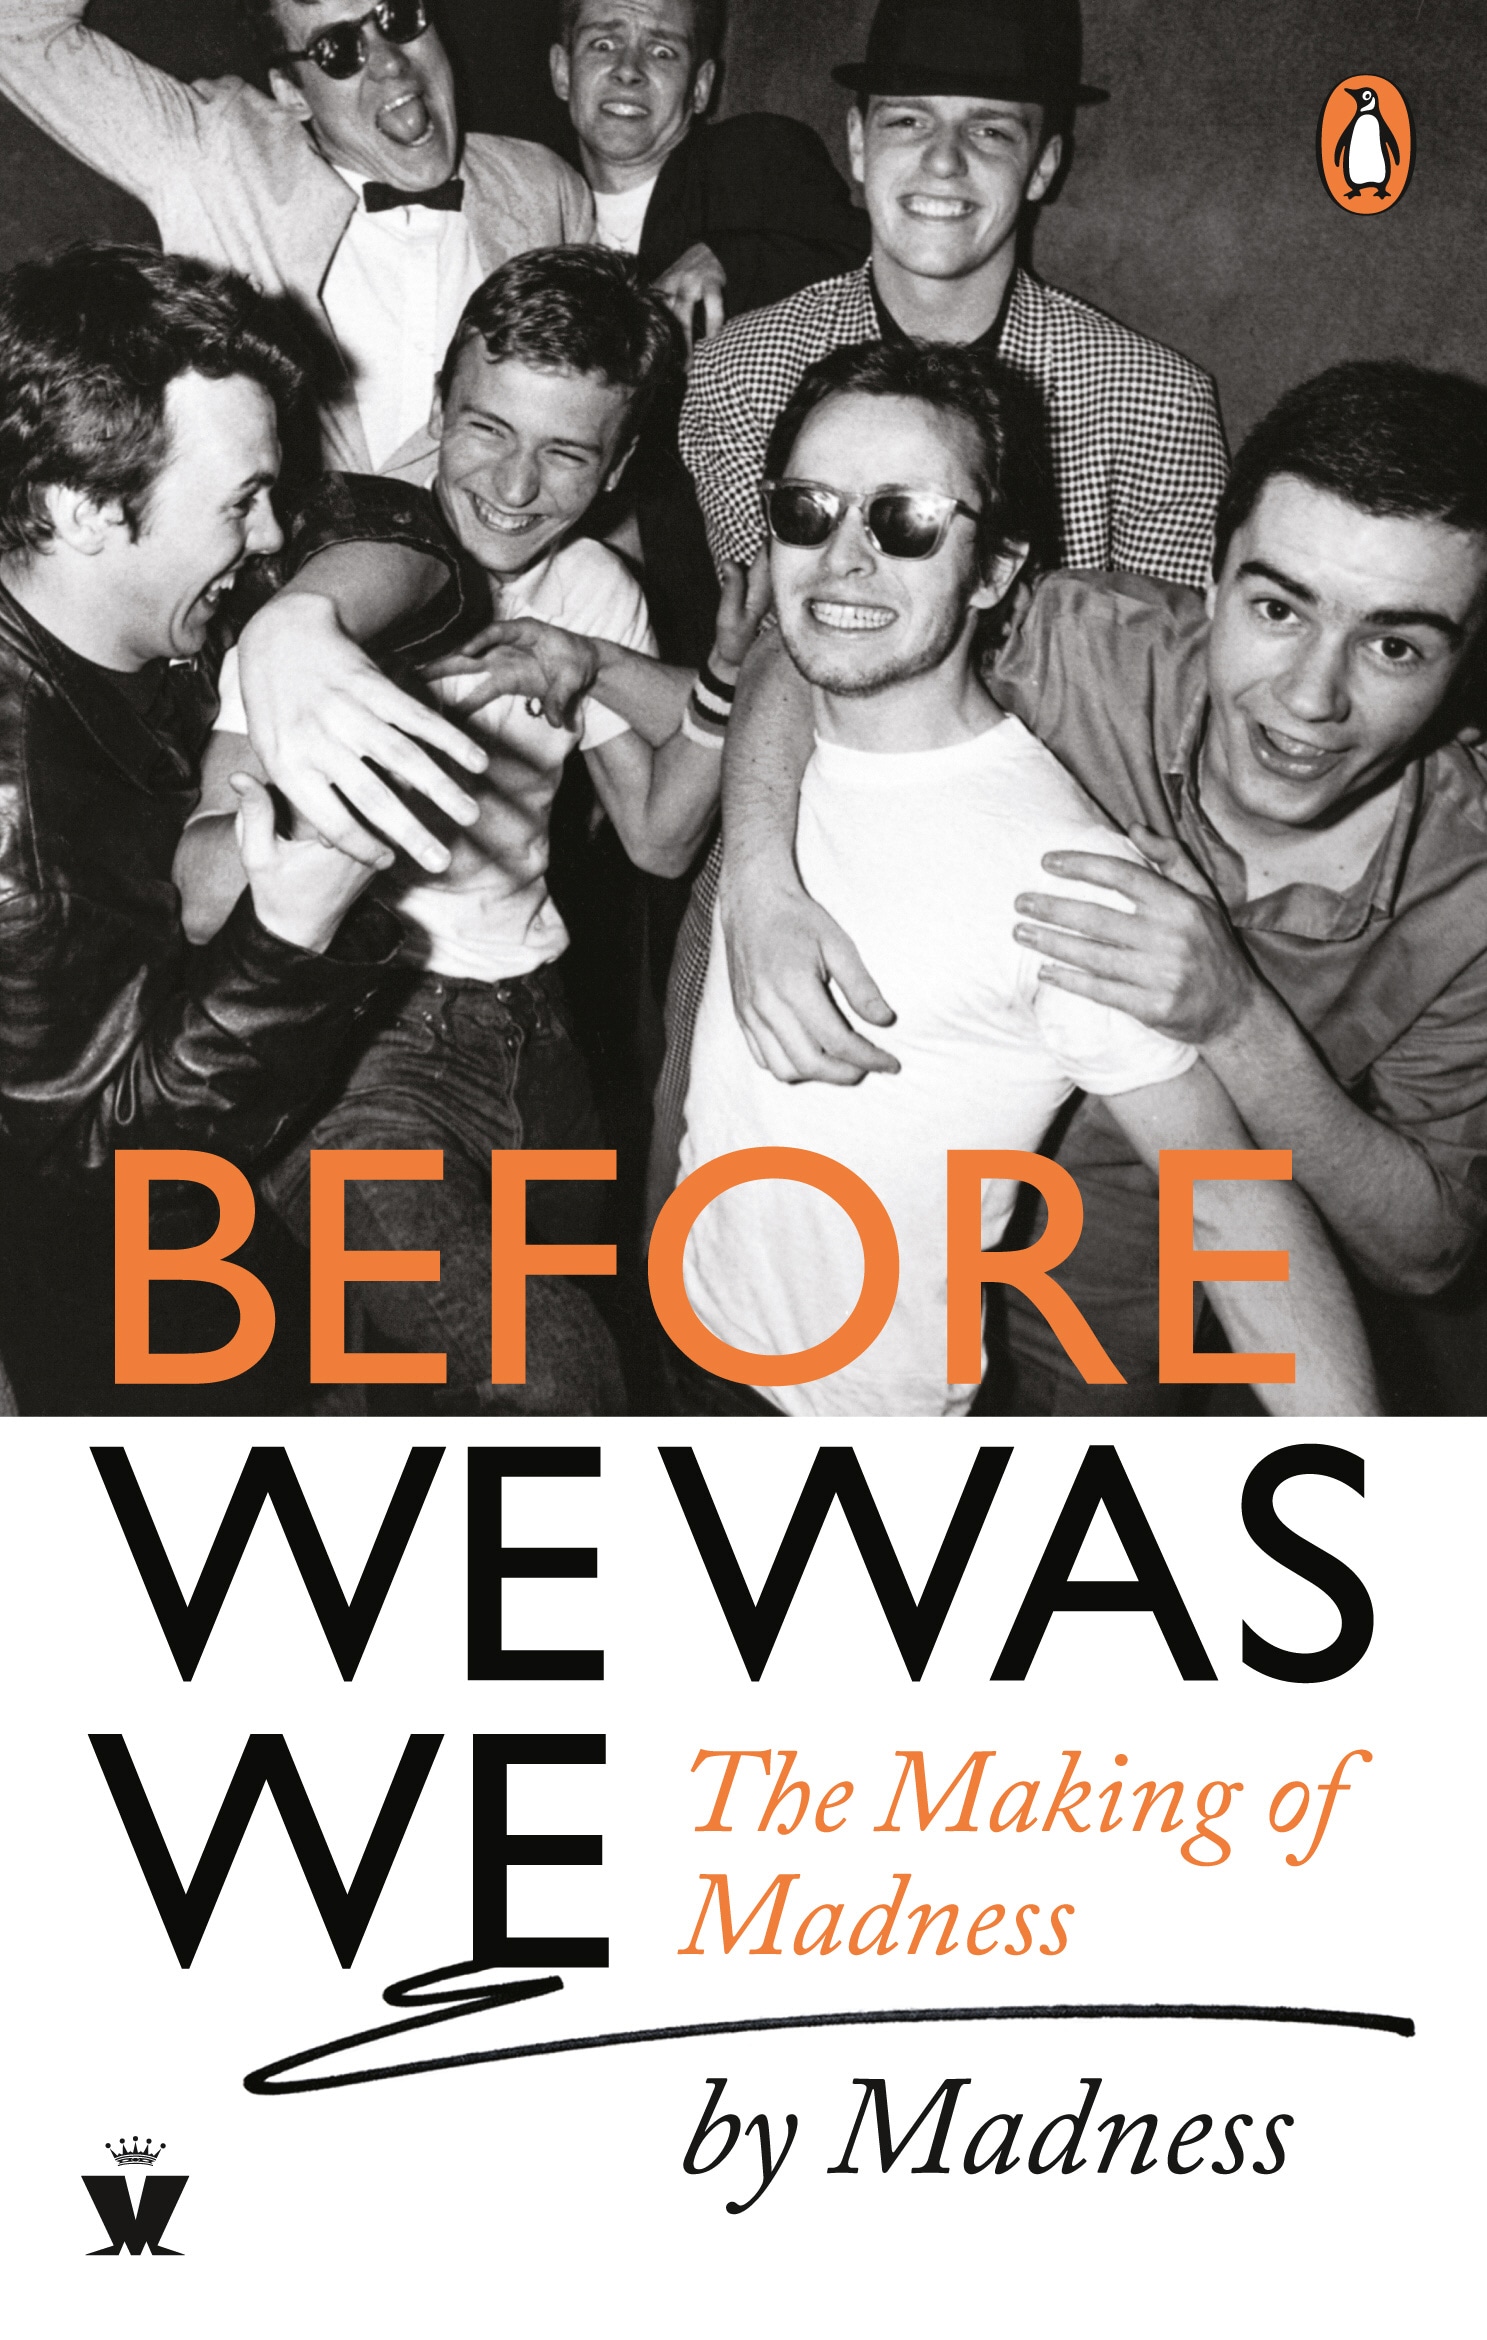 Book “Before We Was We” by Mike Barson — April 9, 2020